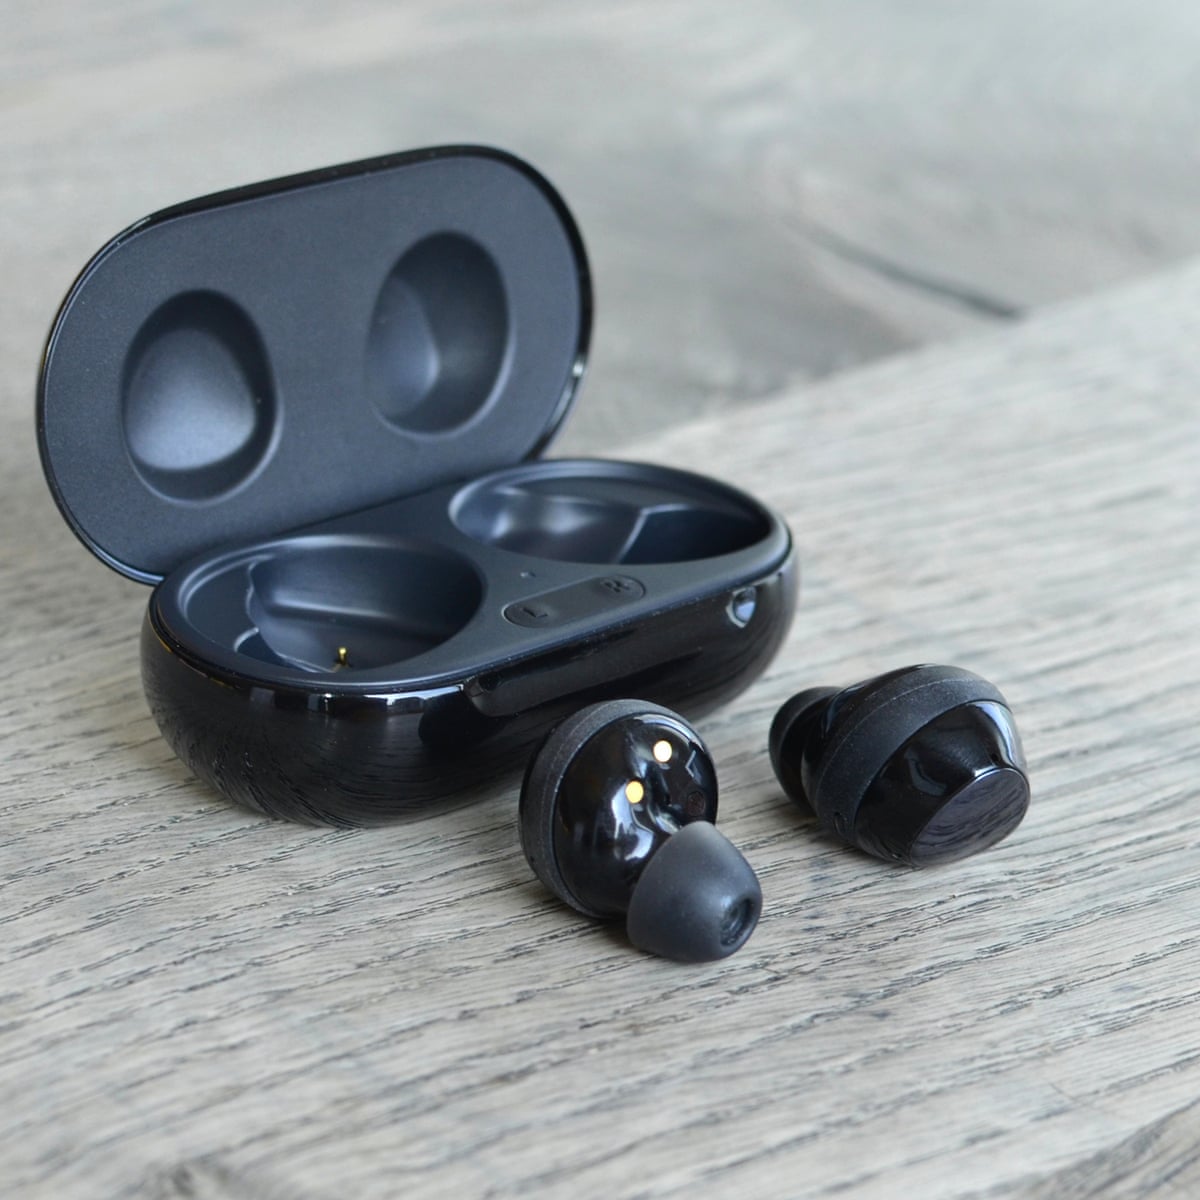 Galaxy Buds+ review: Samsung's AirPods are for everyone | Samsung | The Guardian